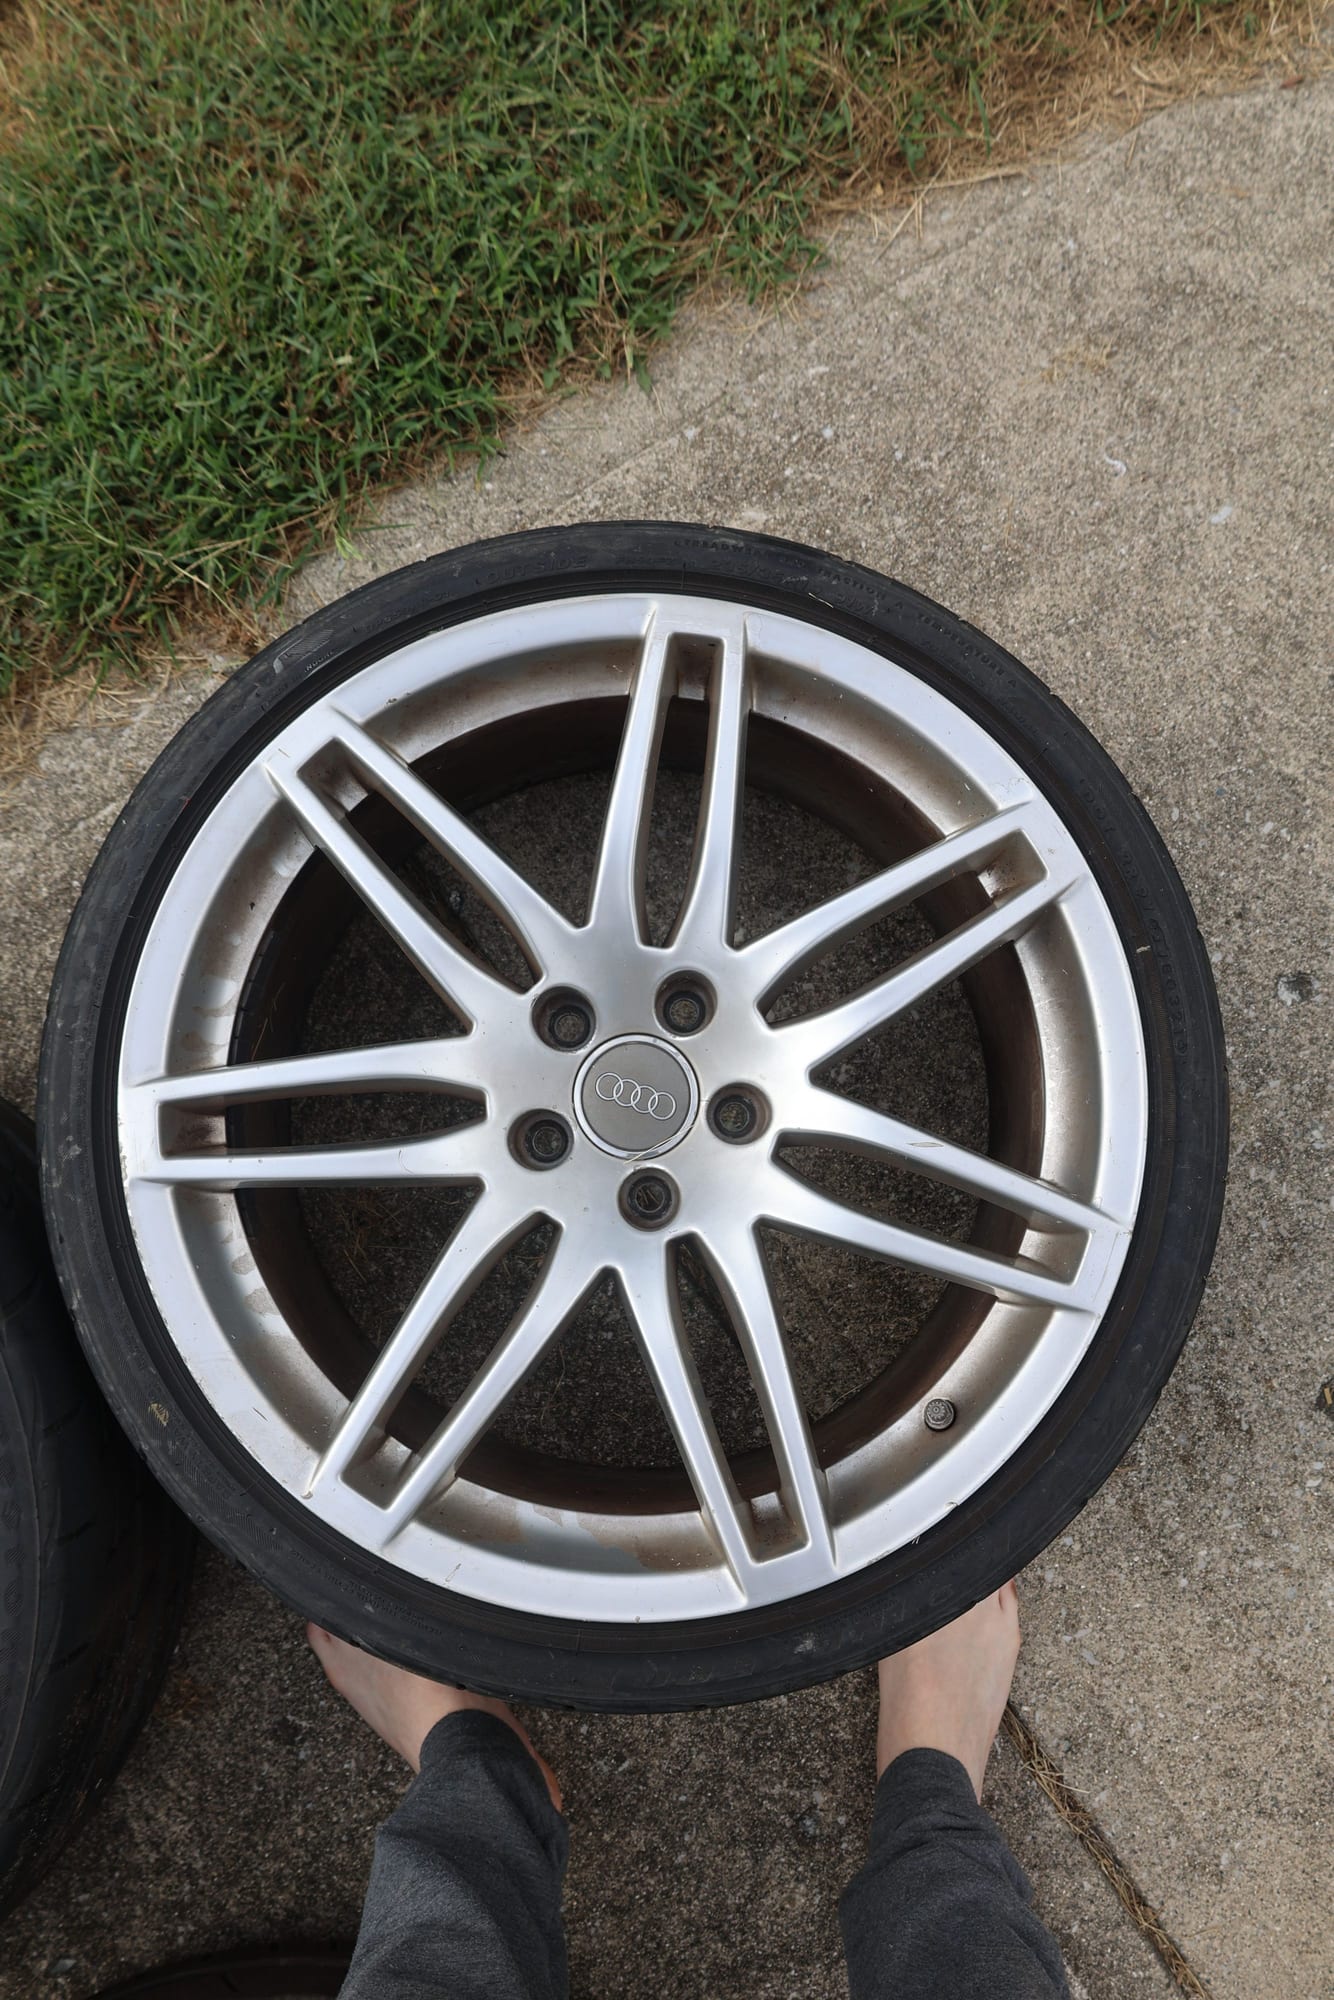 Wheels and Tires/Axles - Genuine Audi RS4 Alloys 19” Hypersliver - Used - 1999 to 2017 Audi All Models - Greenwood, IN 46142, United States